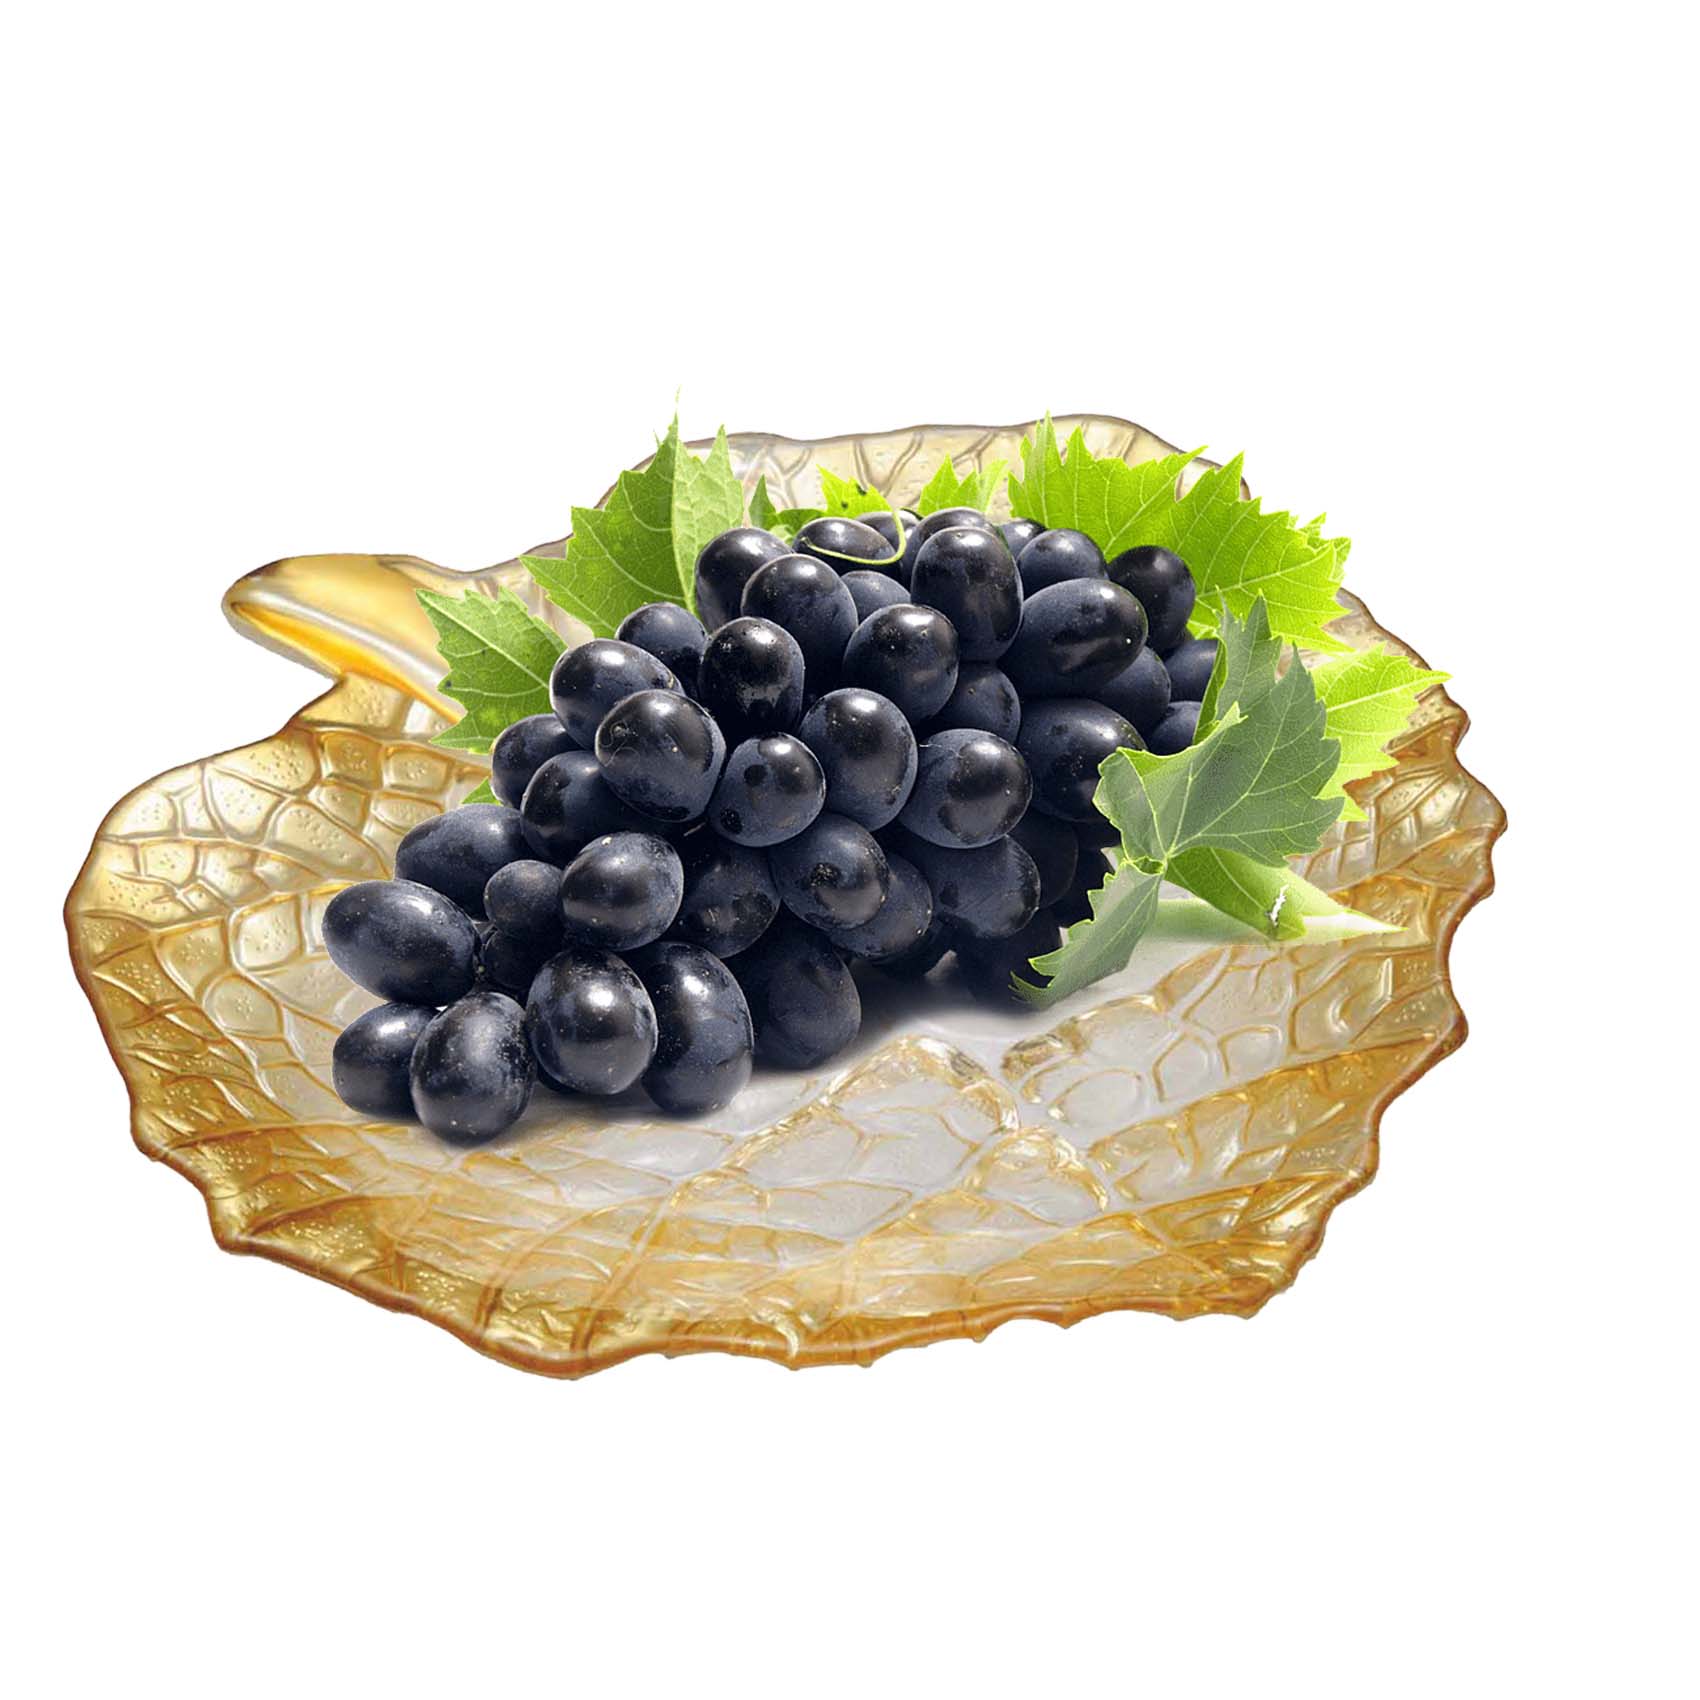 NAMSON HIGH QUALITY  FOOD SERVING TRAY LEAF SHAPE GOLDEN SHADE 20X20X4.5CM MADE IN TAIWAN CO-041PG